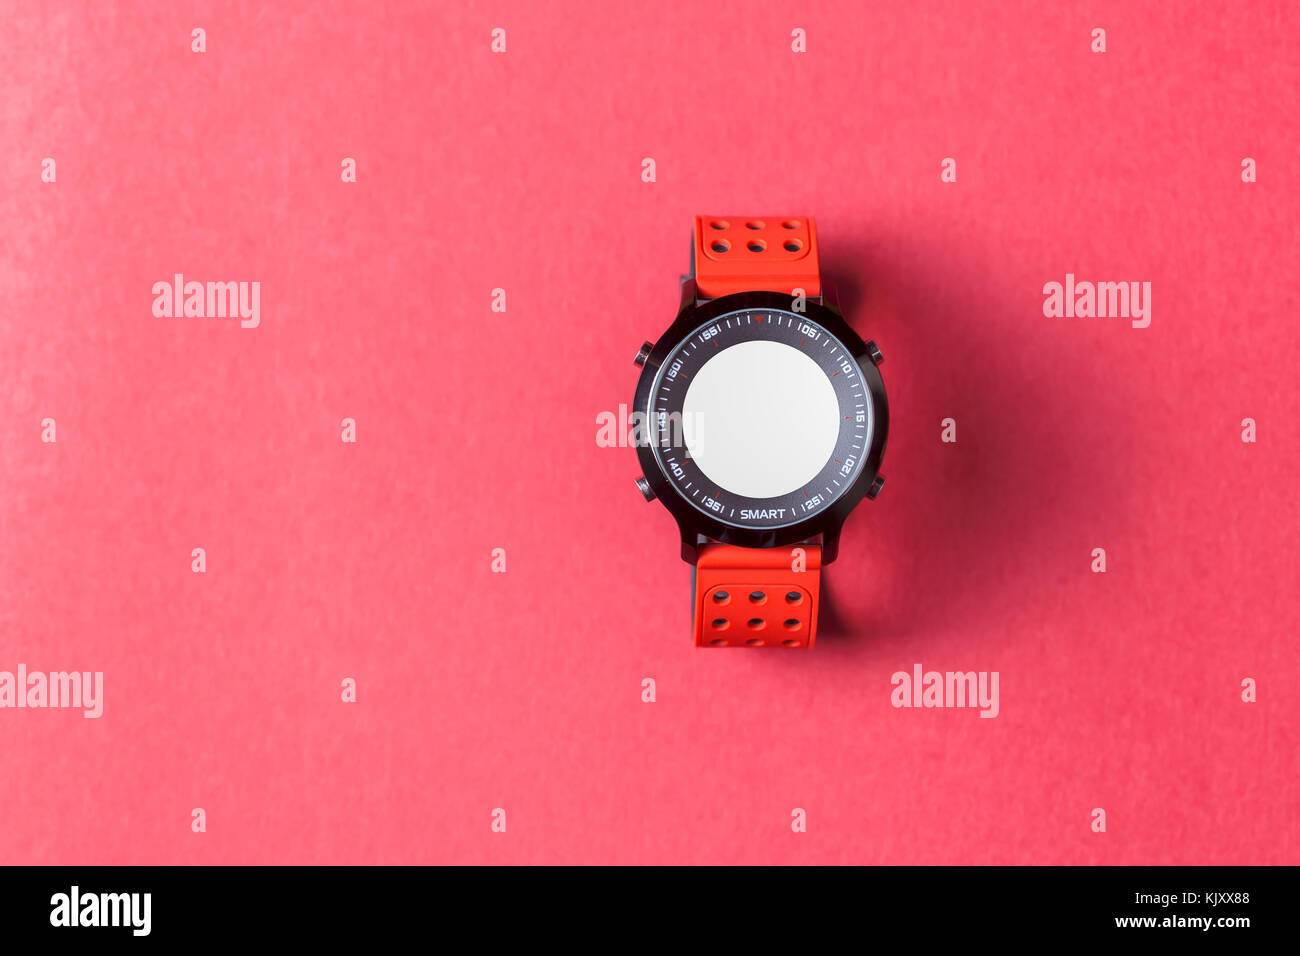 Red smartwatch on red background. Useful for business / tech / sport / any activity presentation background Stock Photo